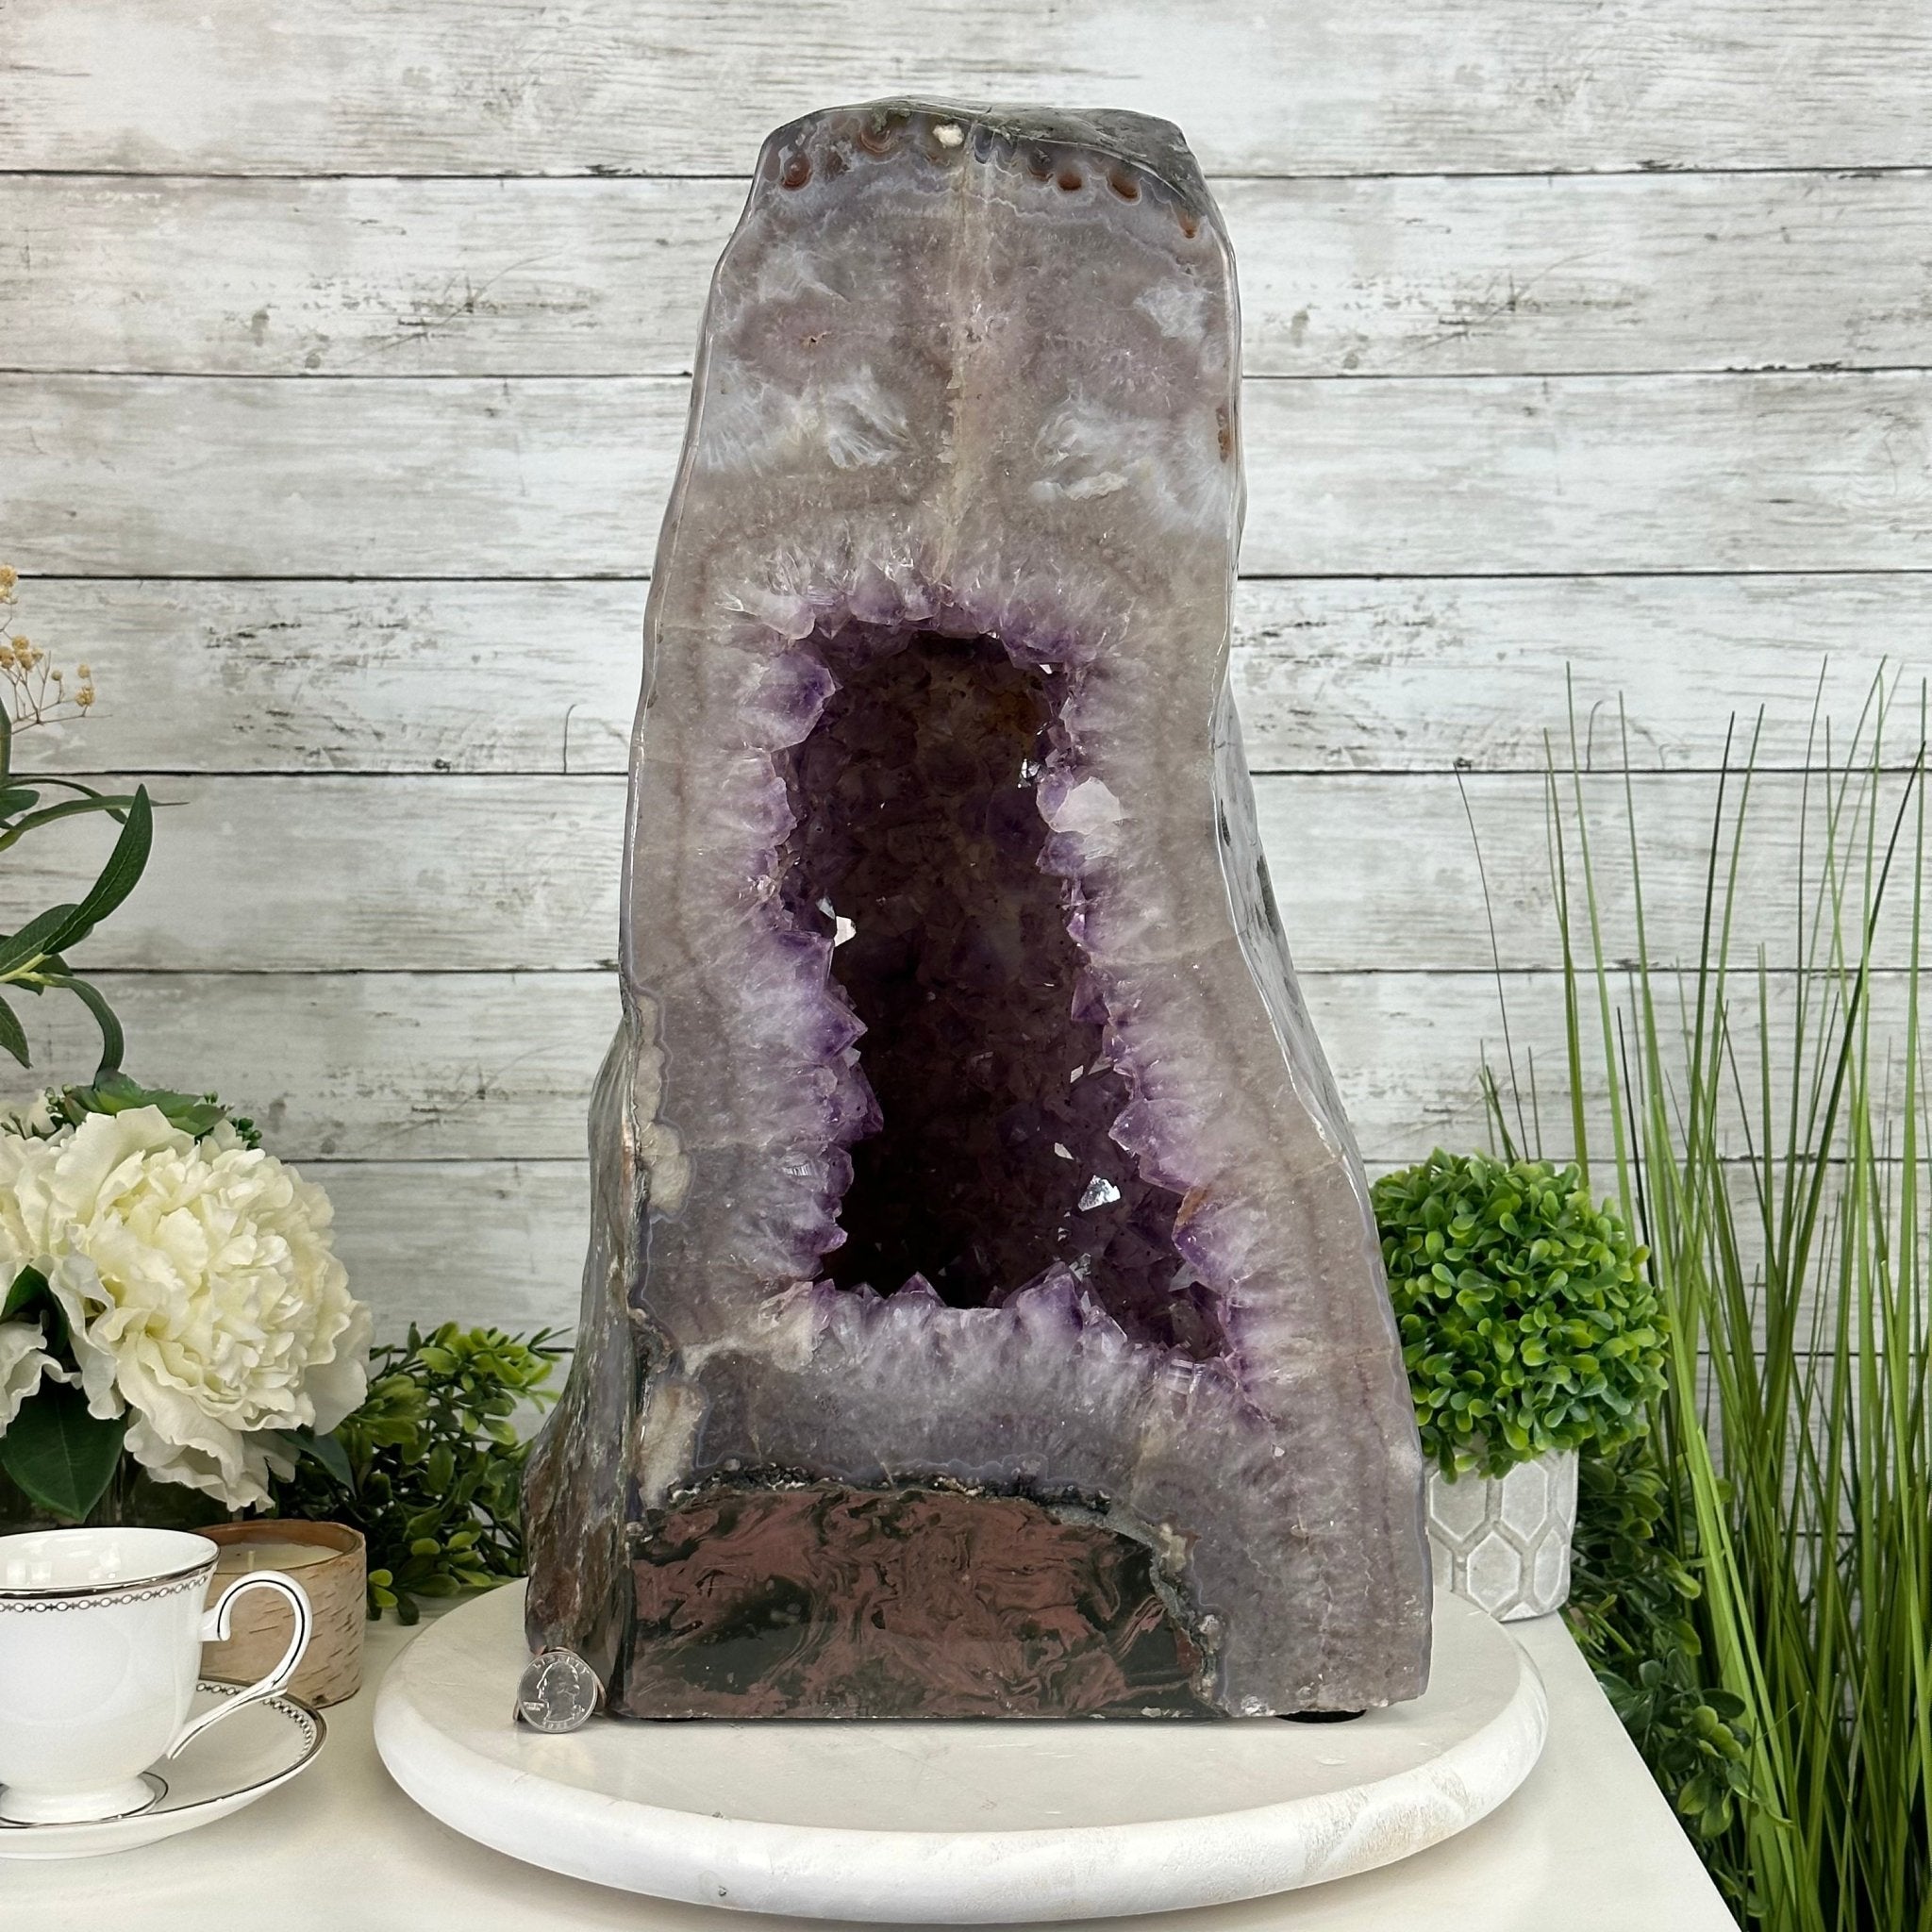 Standard Plus Quality Polished Brazilian Amethyst Cathedral, 67.5 lbs & 19.4" tall Model #5602-0163 by Brazil Gems - Brazil GemsBrazil GemsStandard Plus Quality Polished Brazilian Amethyst Cathedral, 67.5 lbs & 19.4" tall Model #5602-0163 by Brazil GemsPolished Cathedrals5602-0163